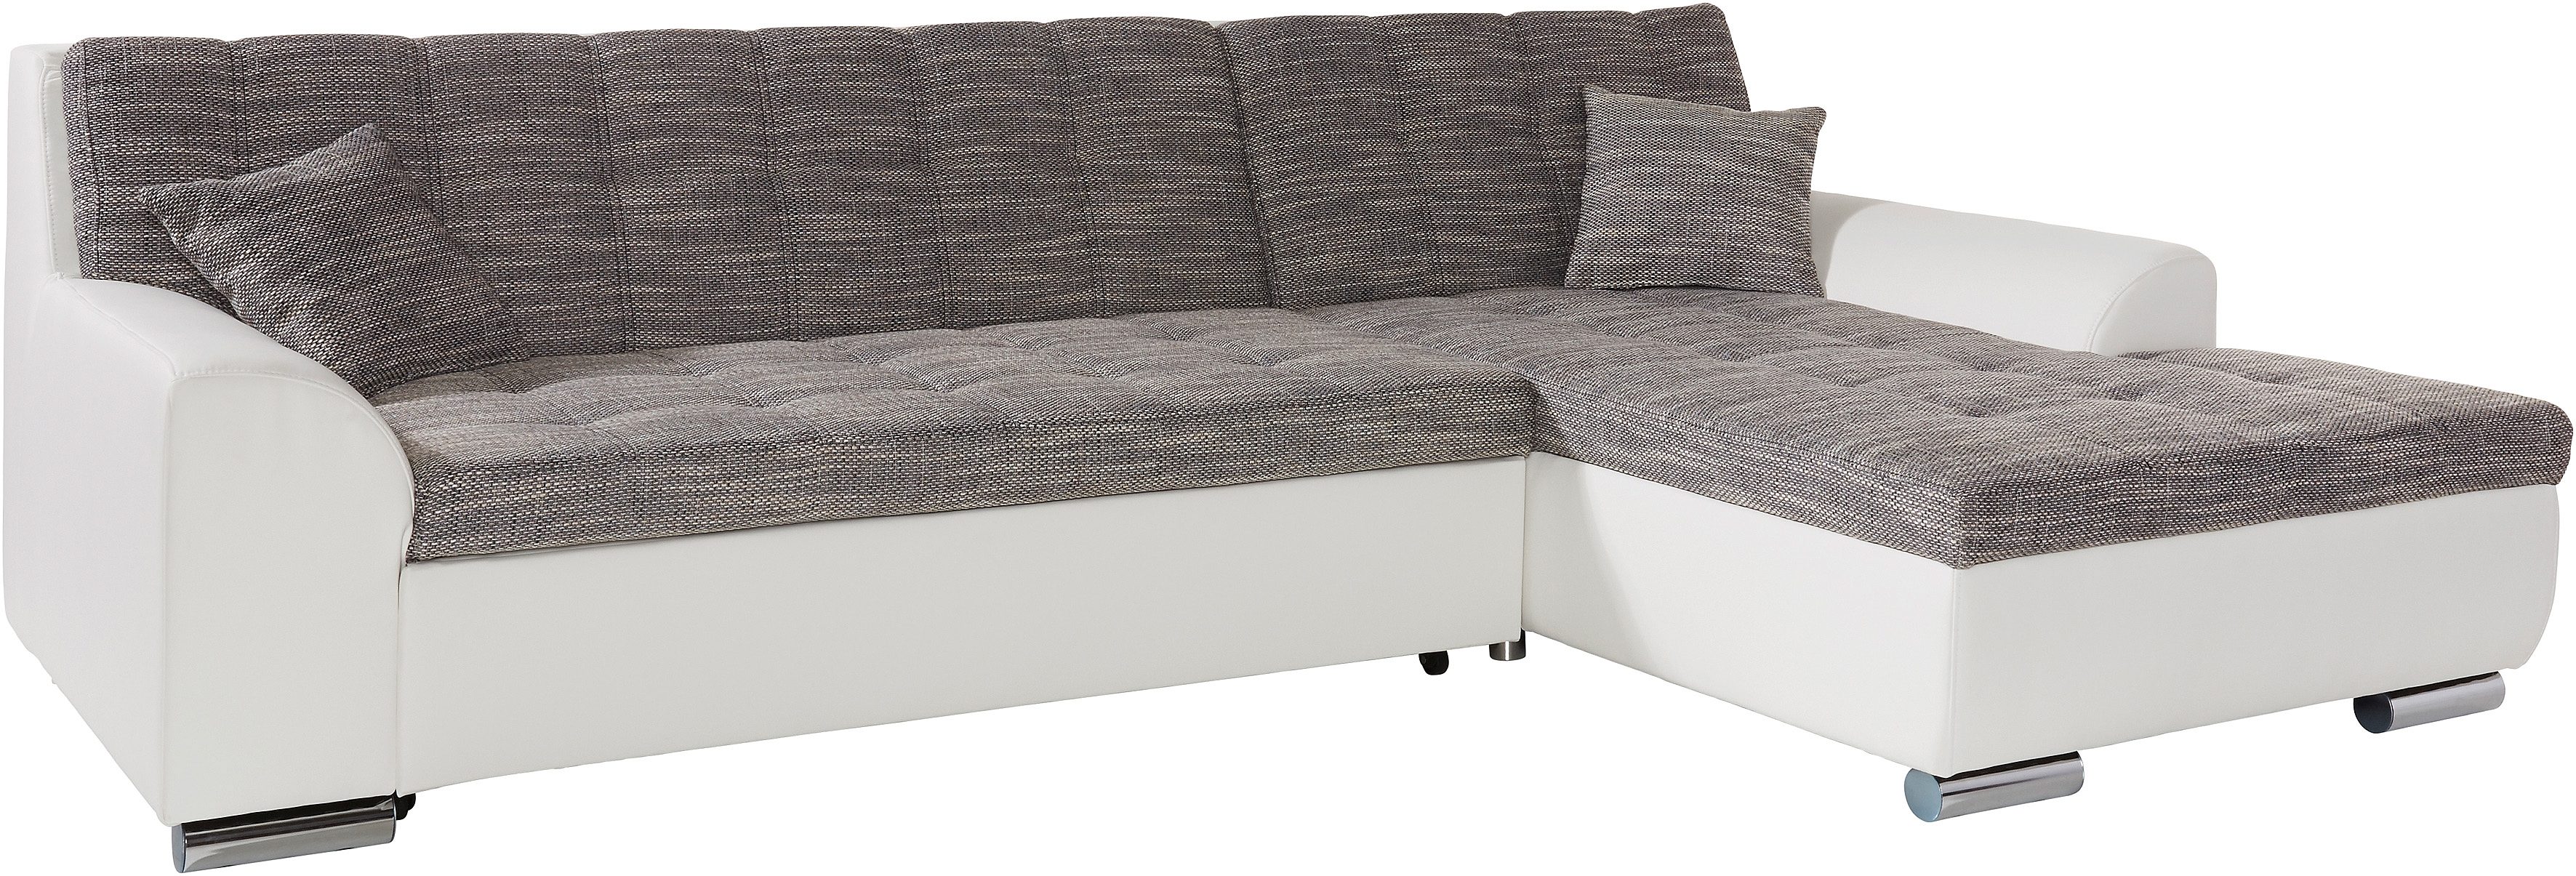 DOMO collection Ecksofa »Treviso Top«, wahlweise mit Bettfunktion-HomeTrends